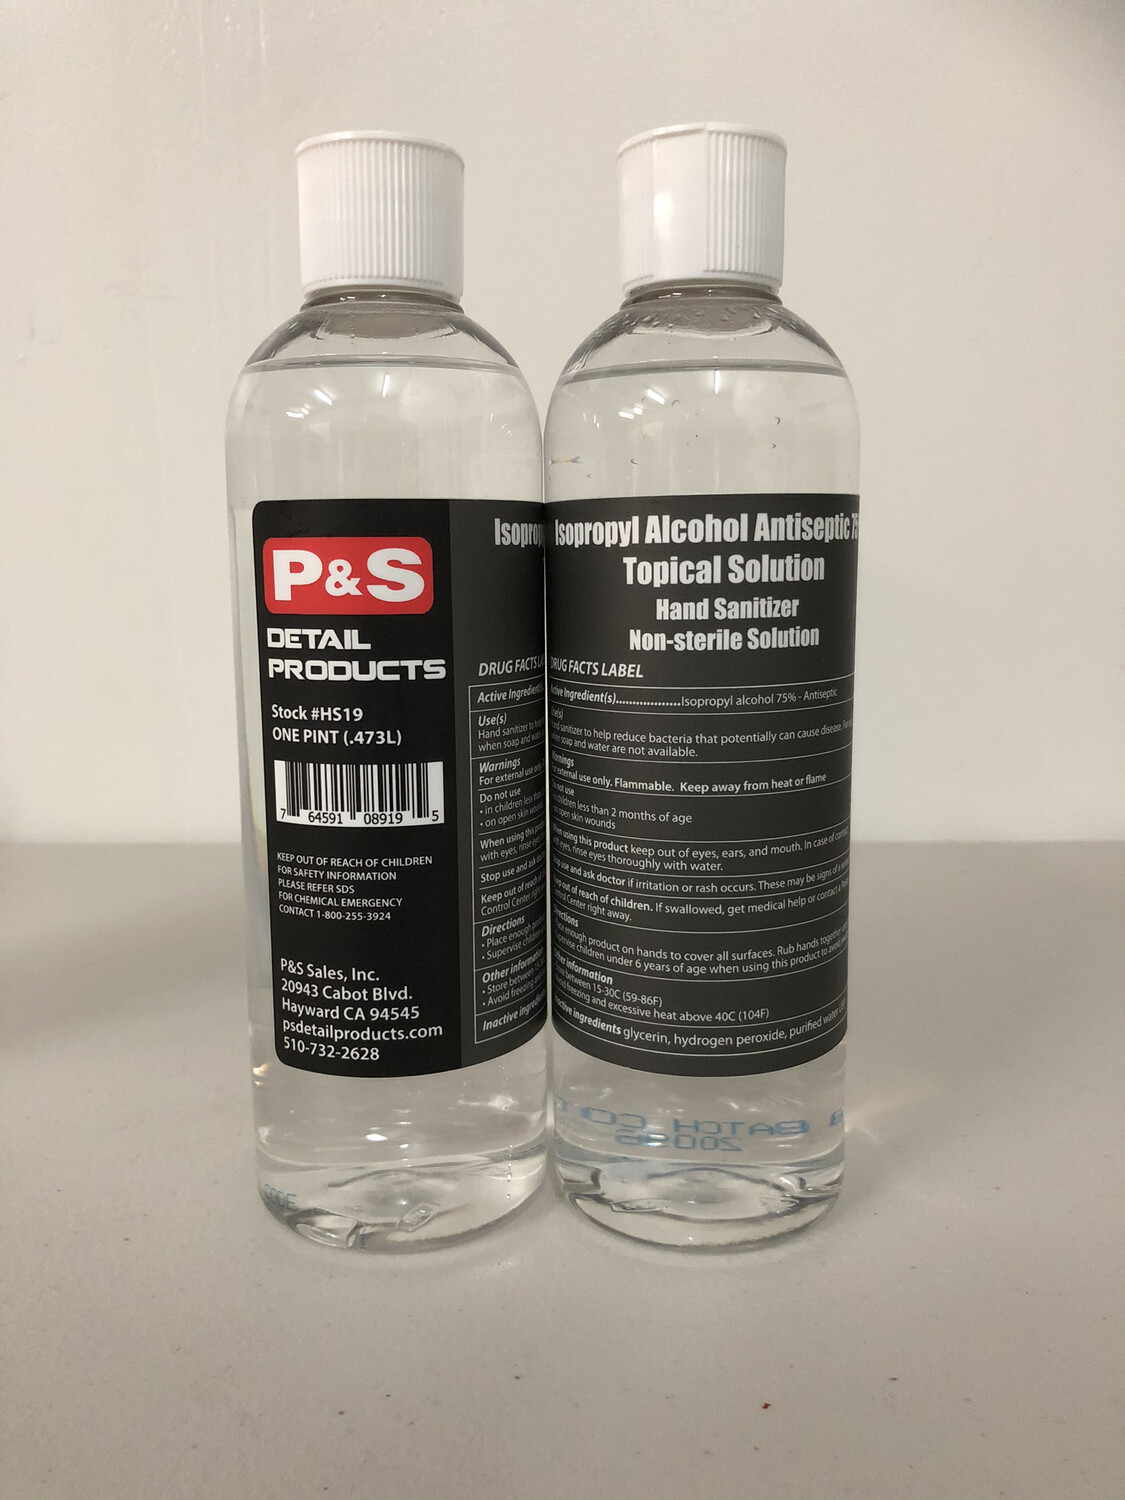 P&S Hand Sanitizer (FDA Approved) - Isopropyl Alcohol Antiseptic 75% Topical Solution- 16 Oz.